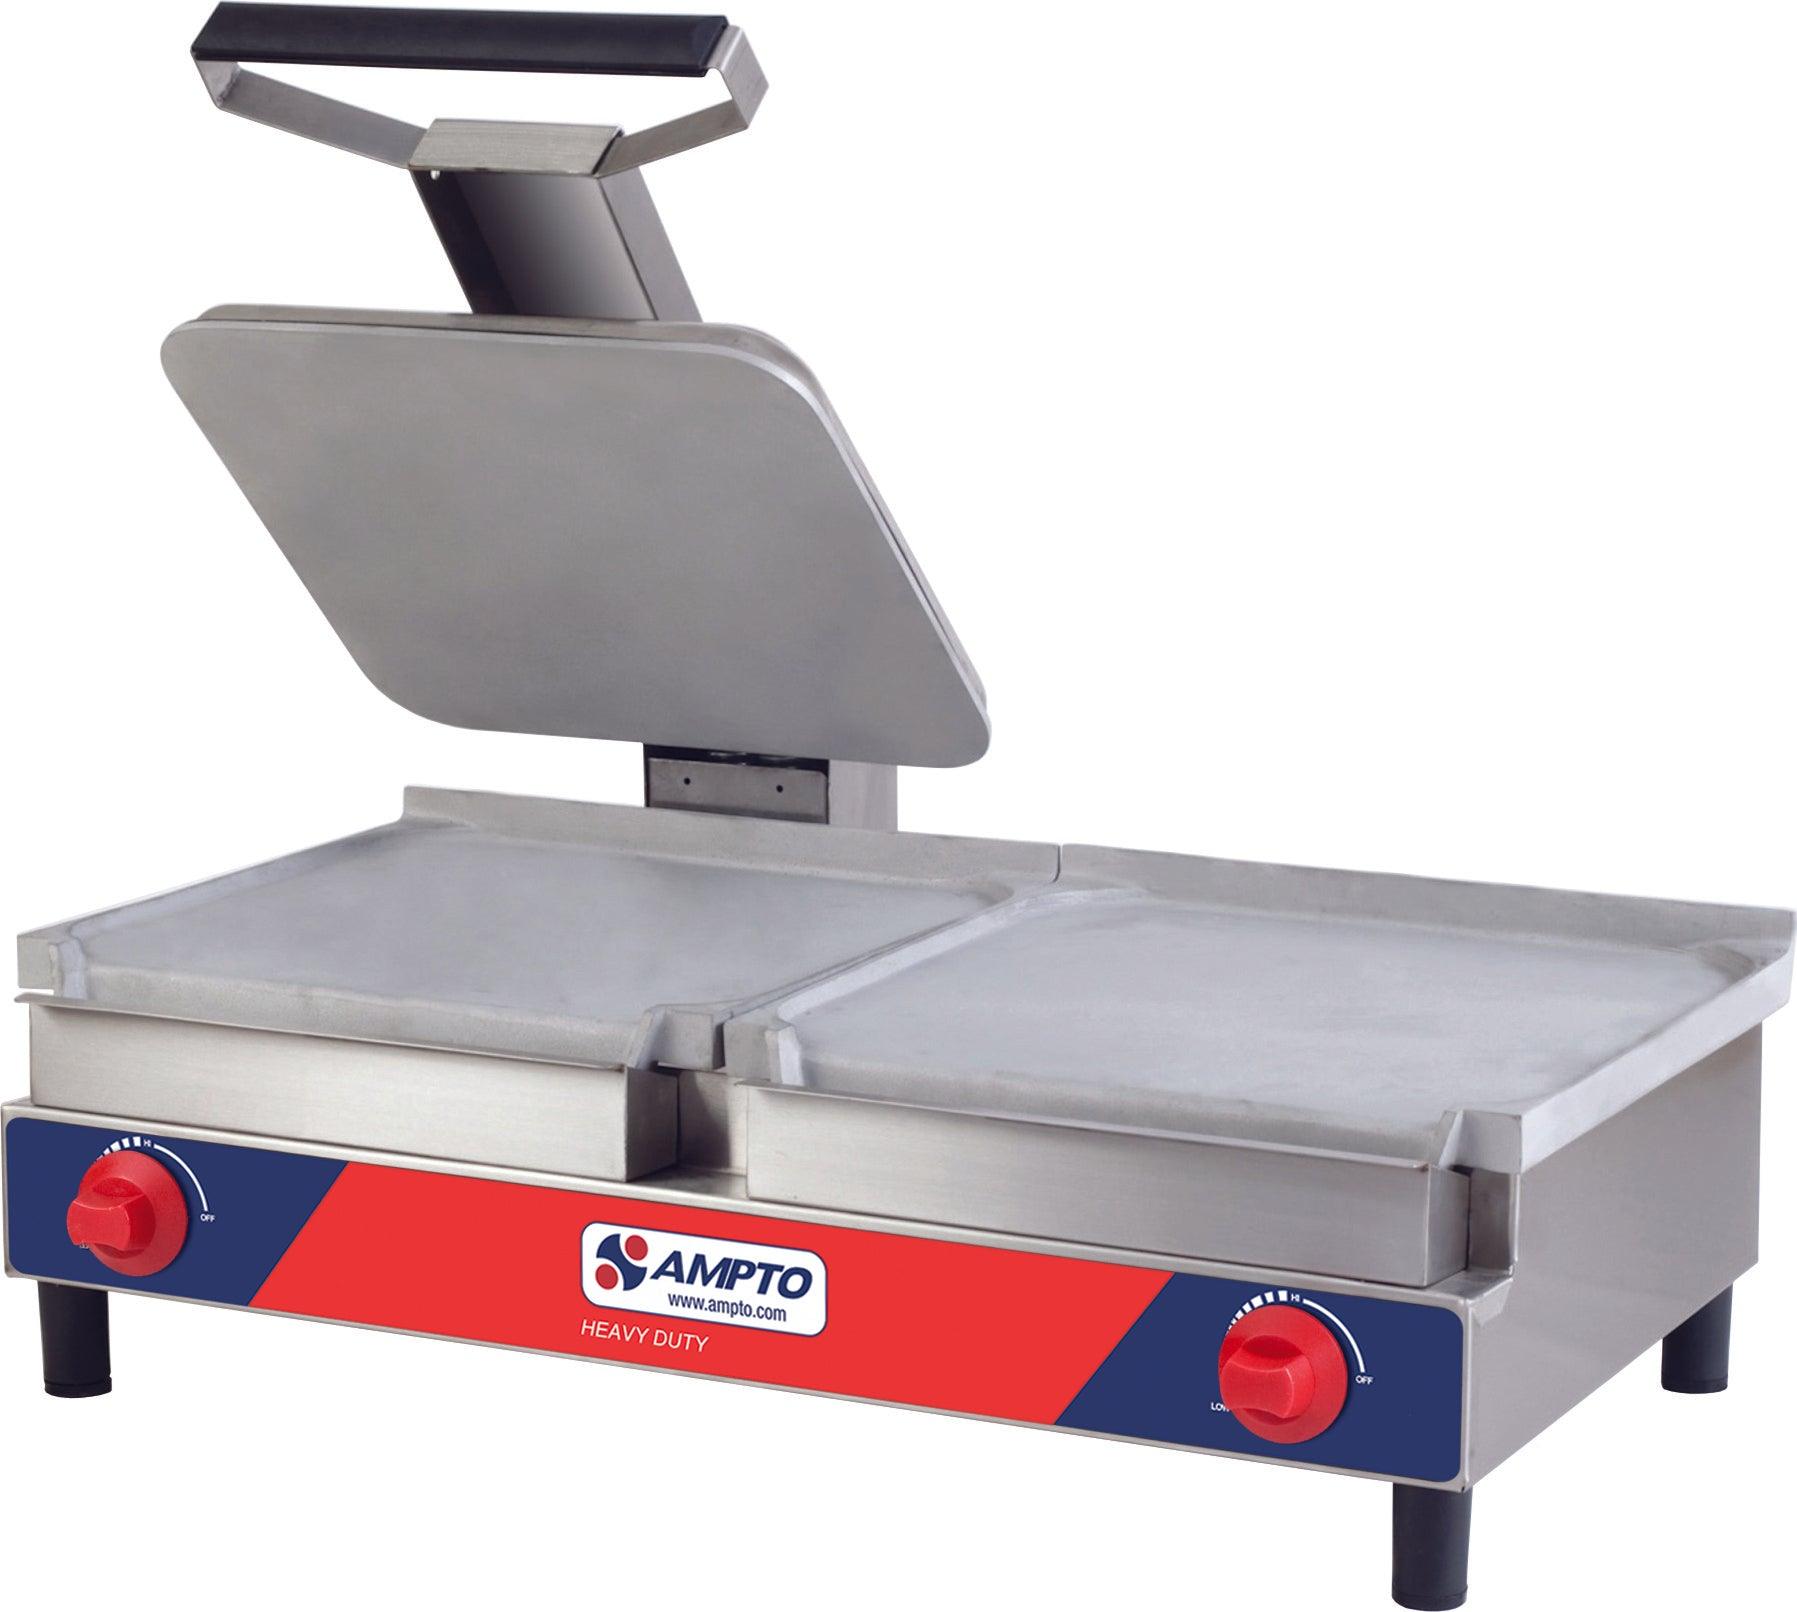 SACL-G Combination Griddle and Sandwich Grill - AMPTO